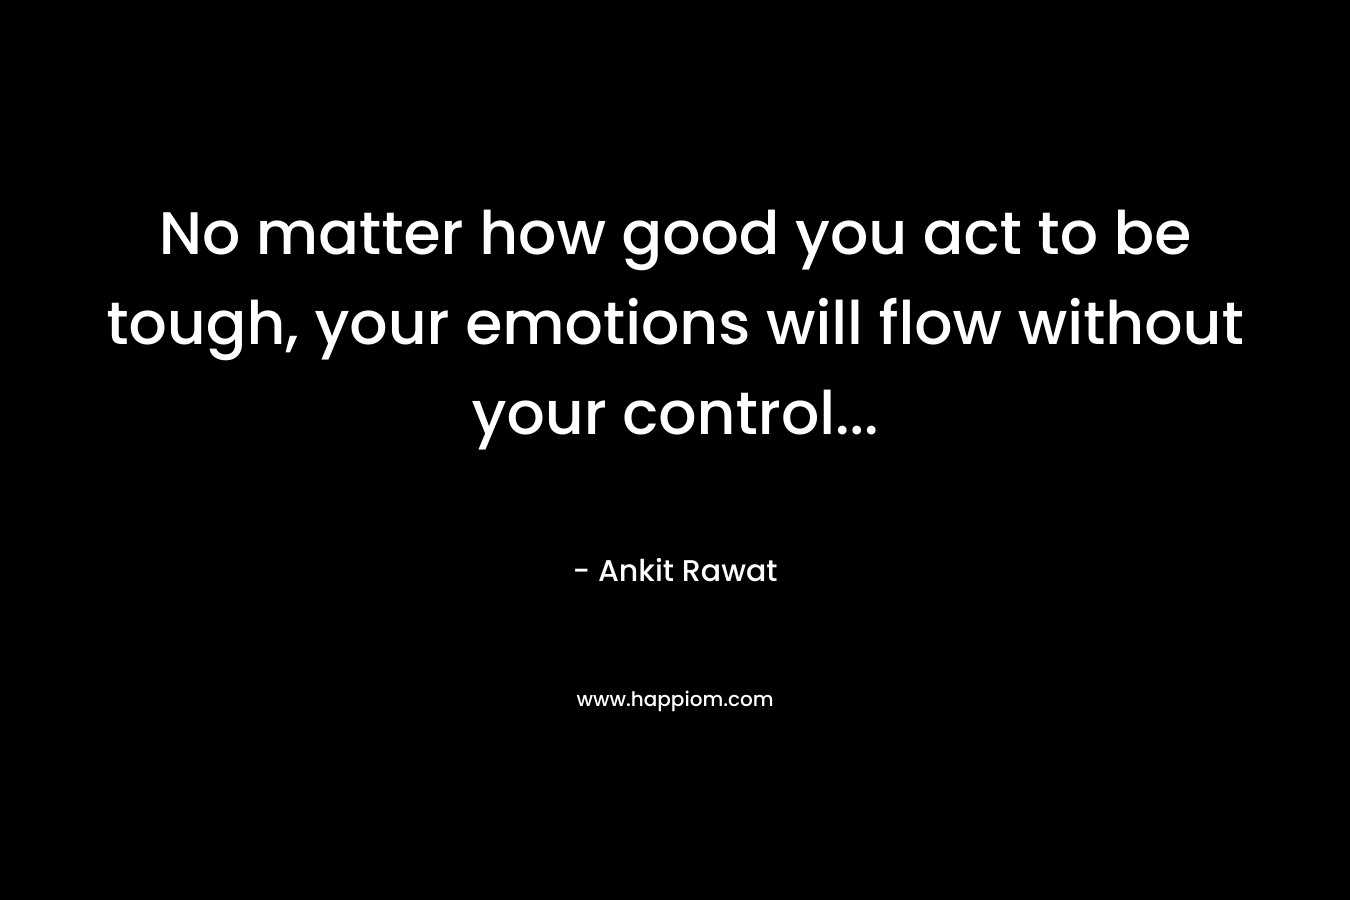 No matter how good you act to be tough, your emotions will flow without your control...